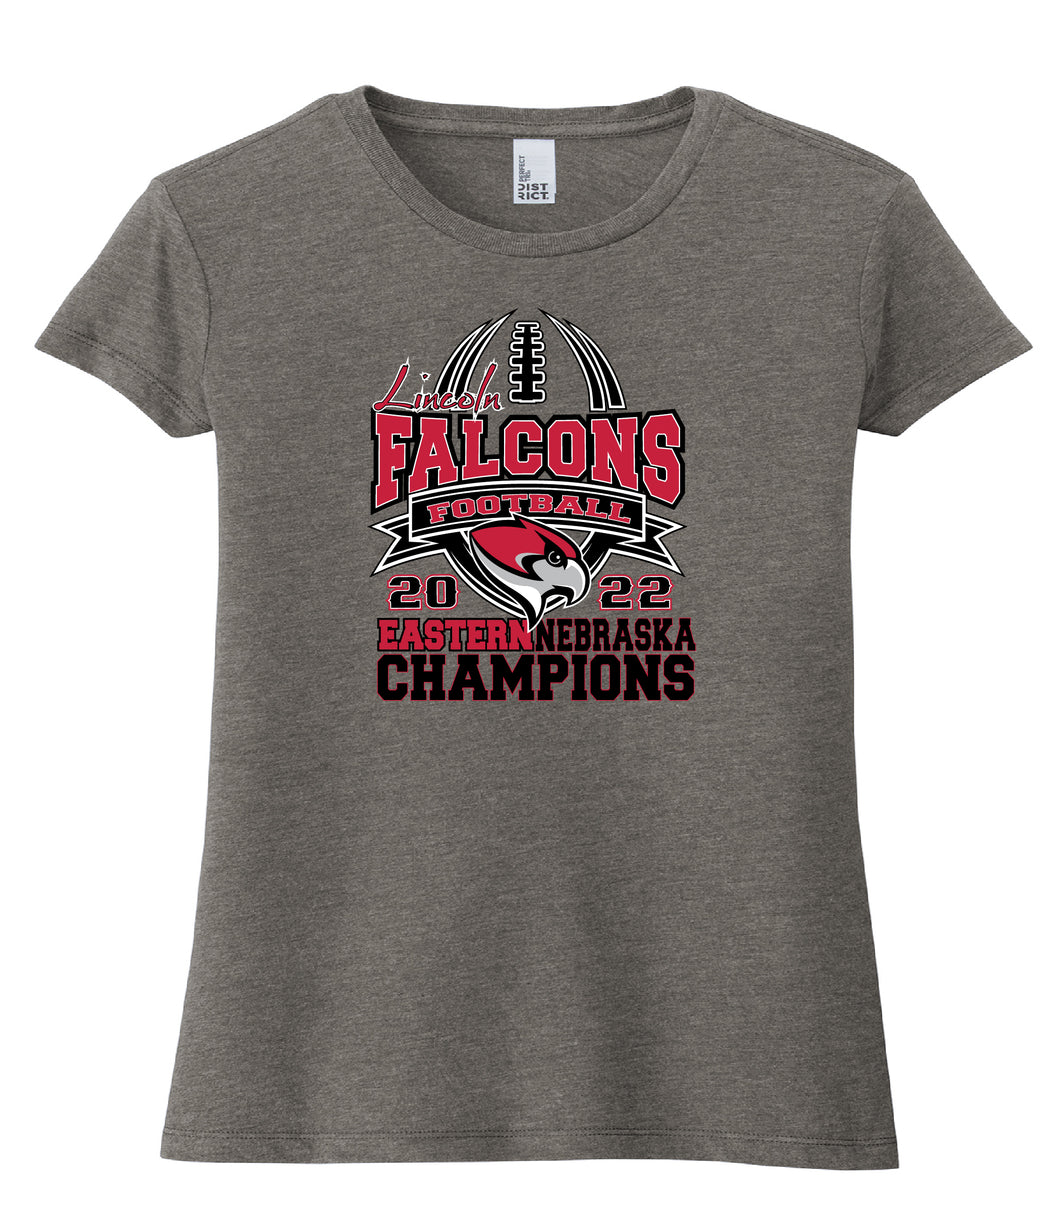 DT155 Falcons Champs Womens Tee